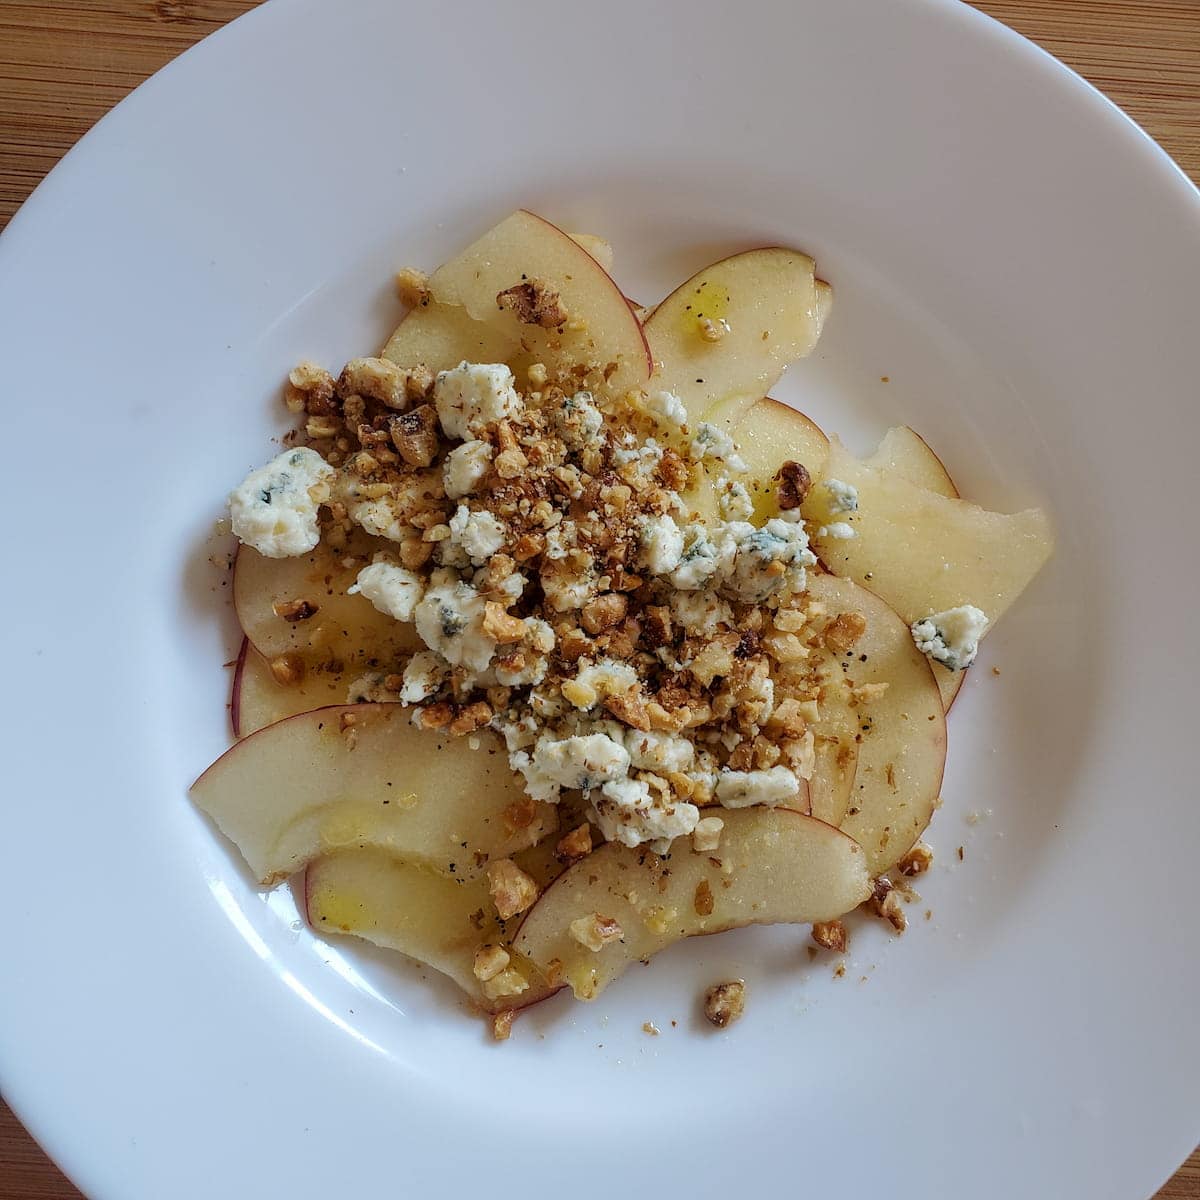 Apple and blue cheese salad with an apple cider vinaigrette. Thinly sliced apples with toasted walnuts and blue cheese.